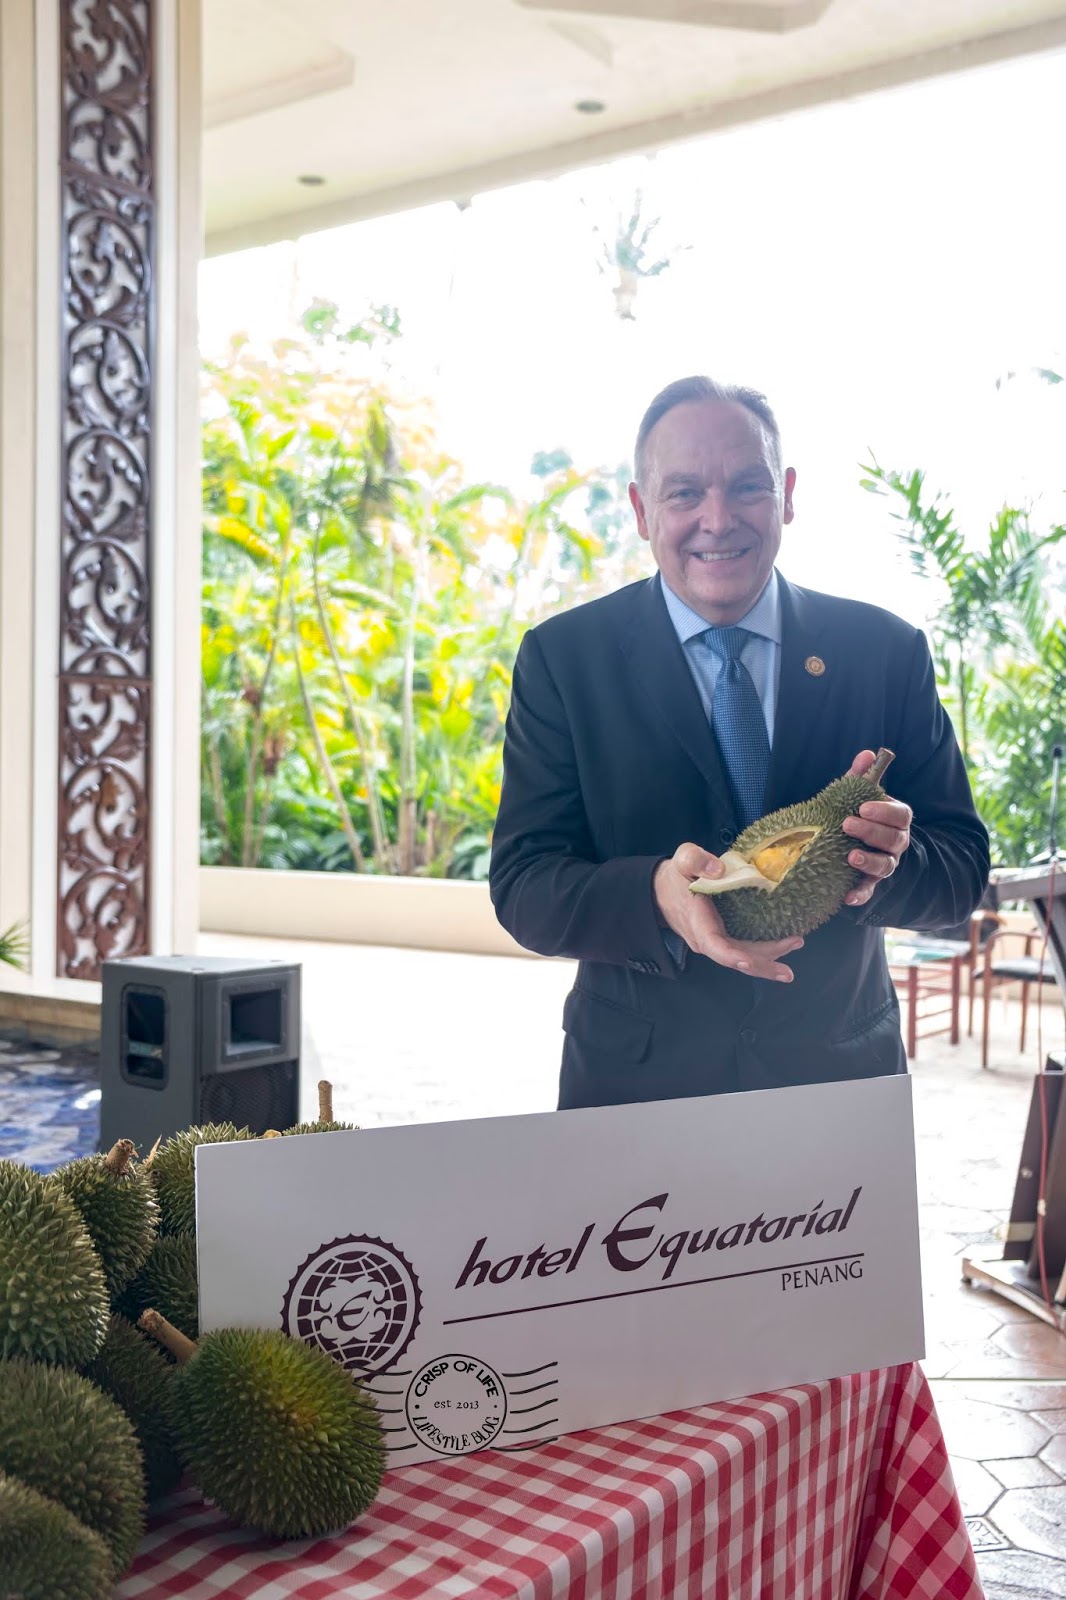 All You Can Eat Kampung Durian Buffet at Hotel Equatorial for RM 40nett